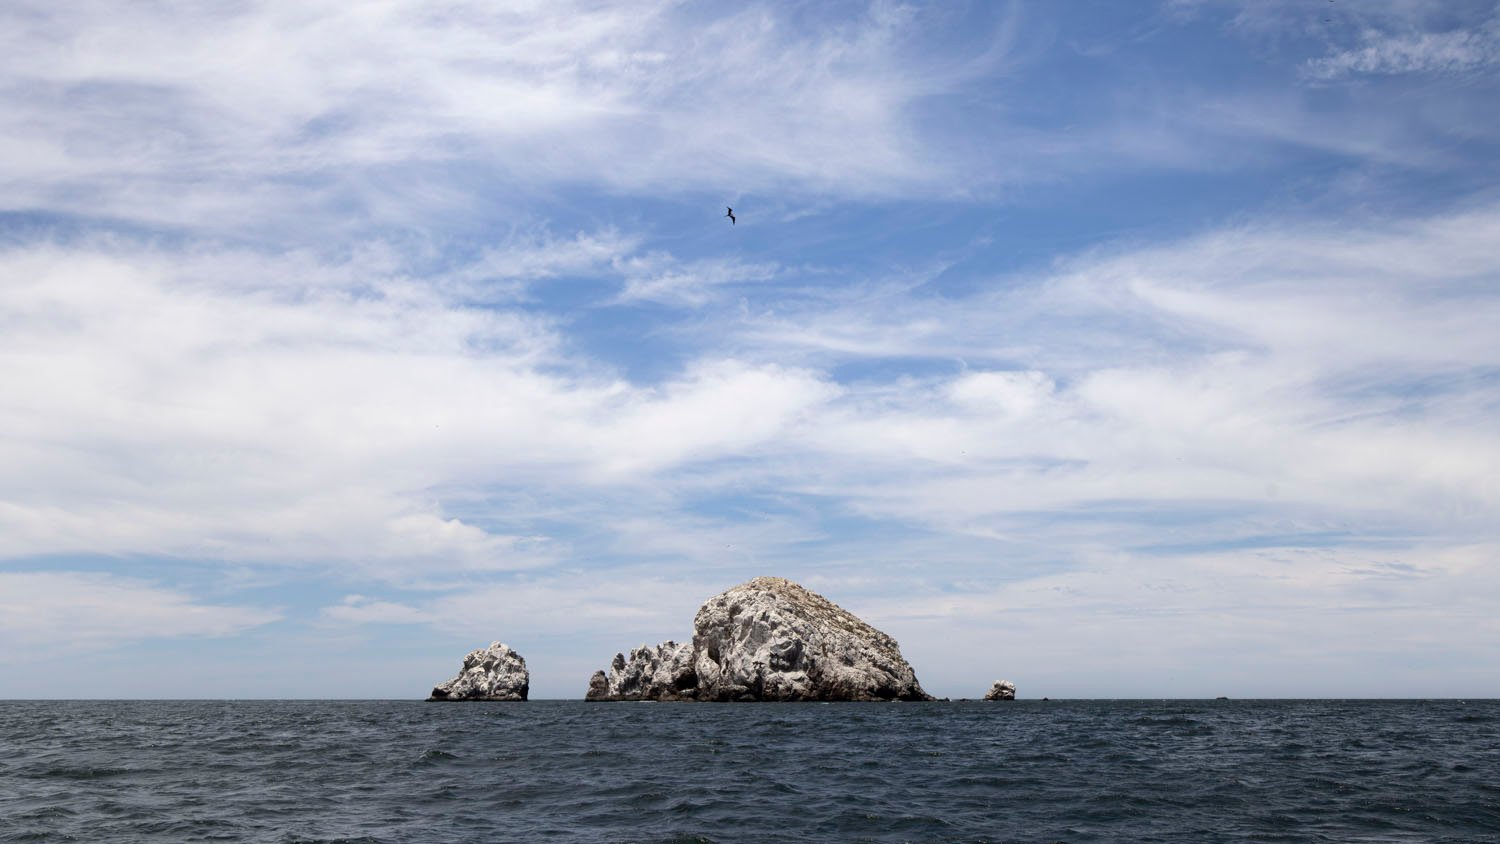 A large rugged rock formation surrounded by a slightly choppy sea under a cloudy sky, with a bird flying high above.